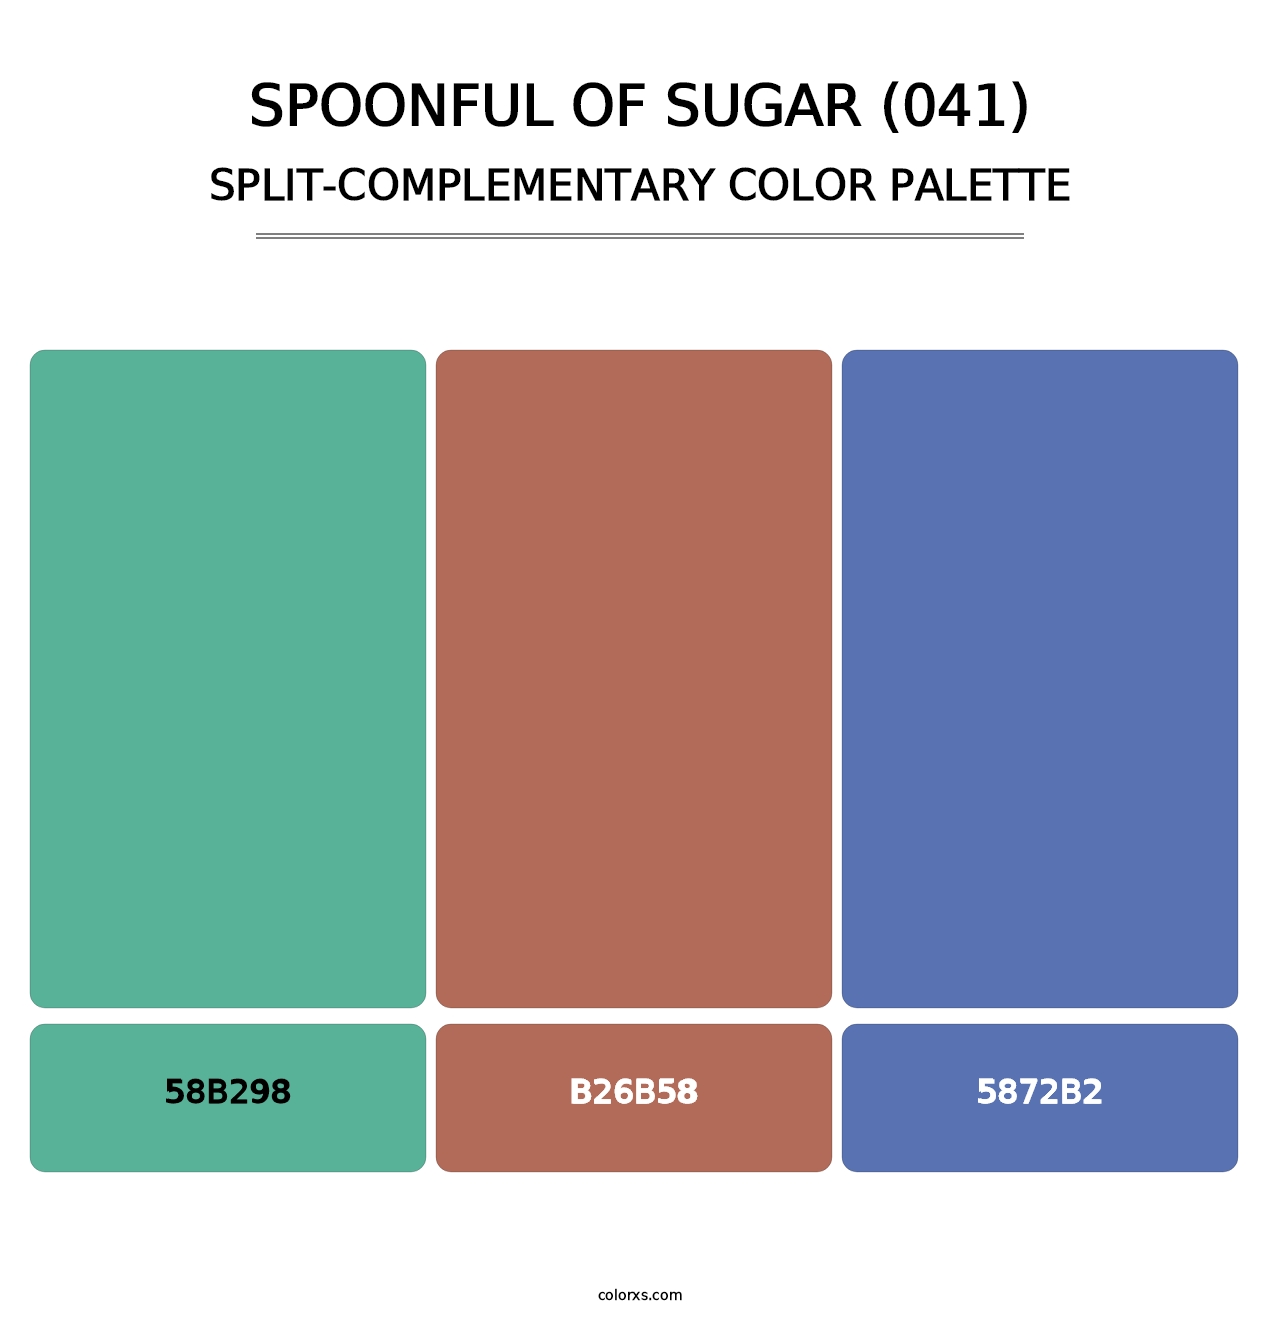 Spoonful of Sugar (041) - Split-Complementary Color Palette